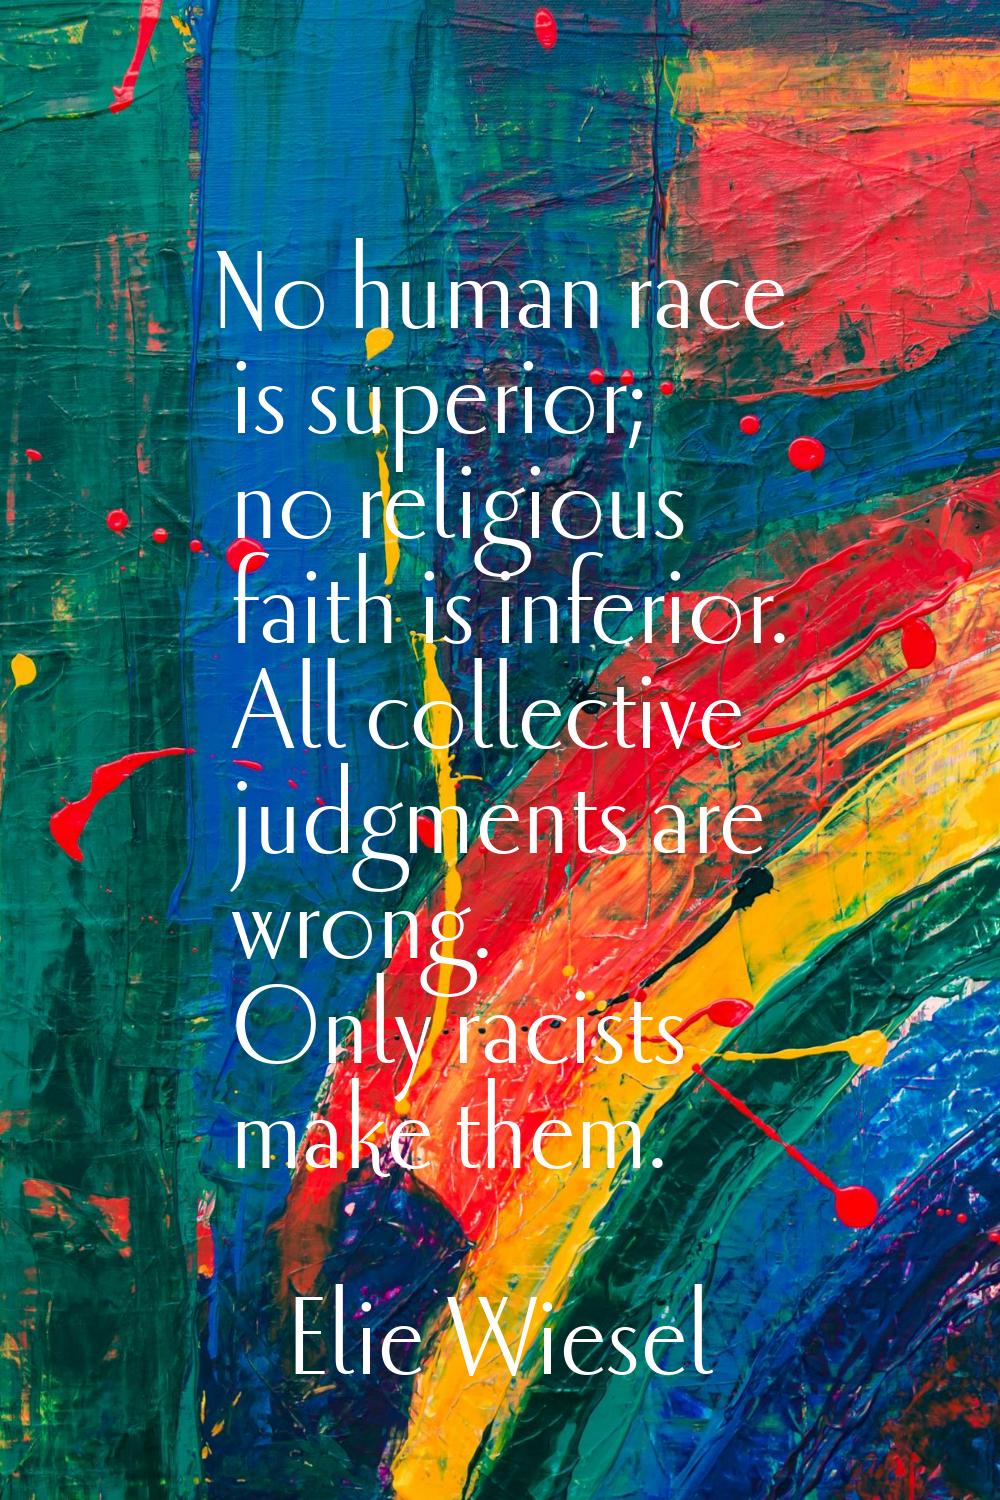 No human race is superior; no religious faith is inferior. All collective judgments are wrong. Only